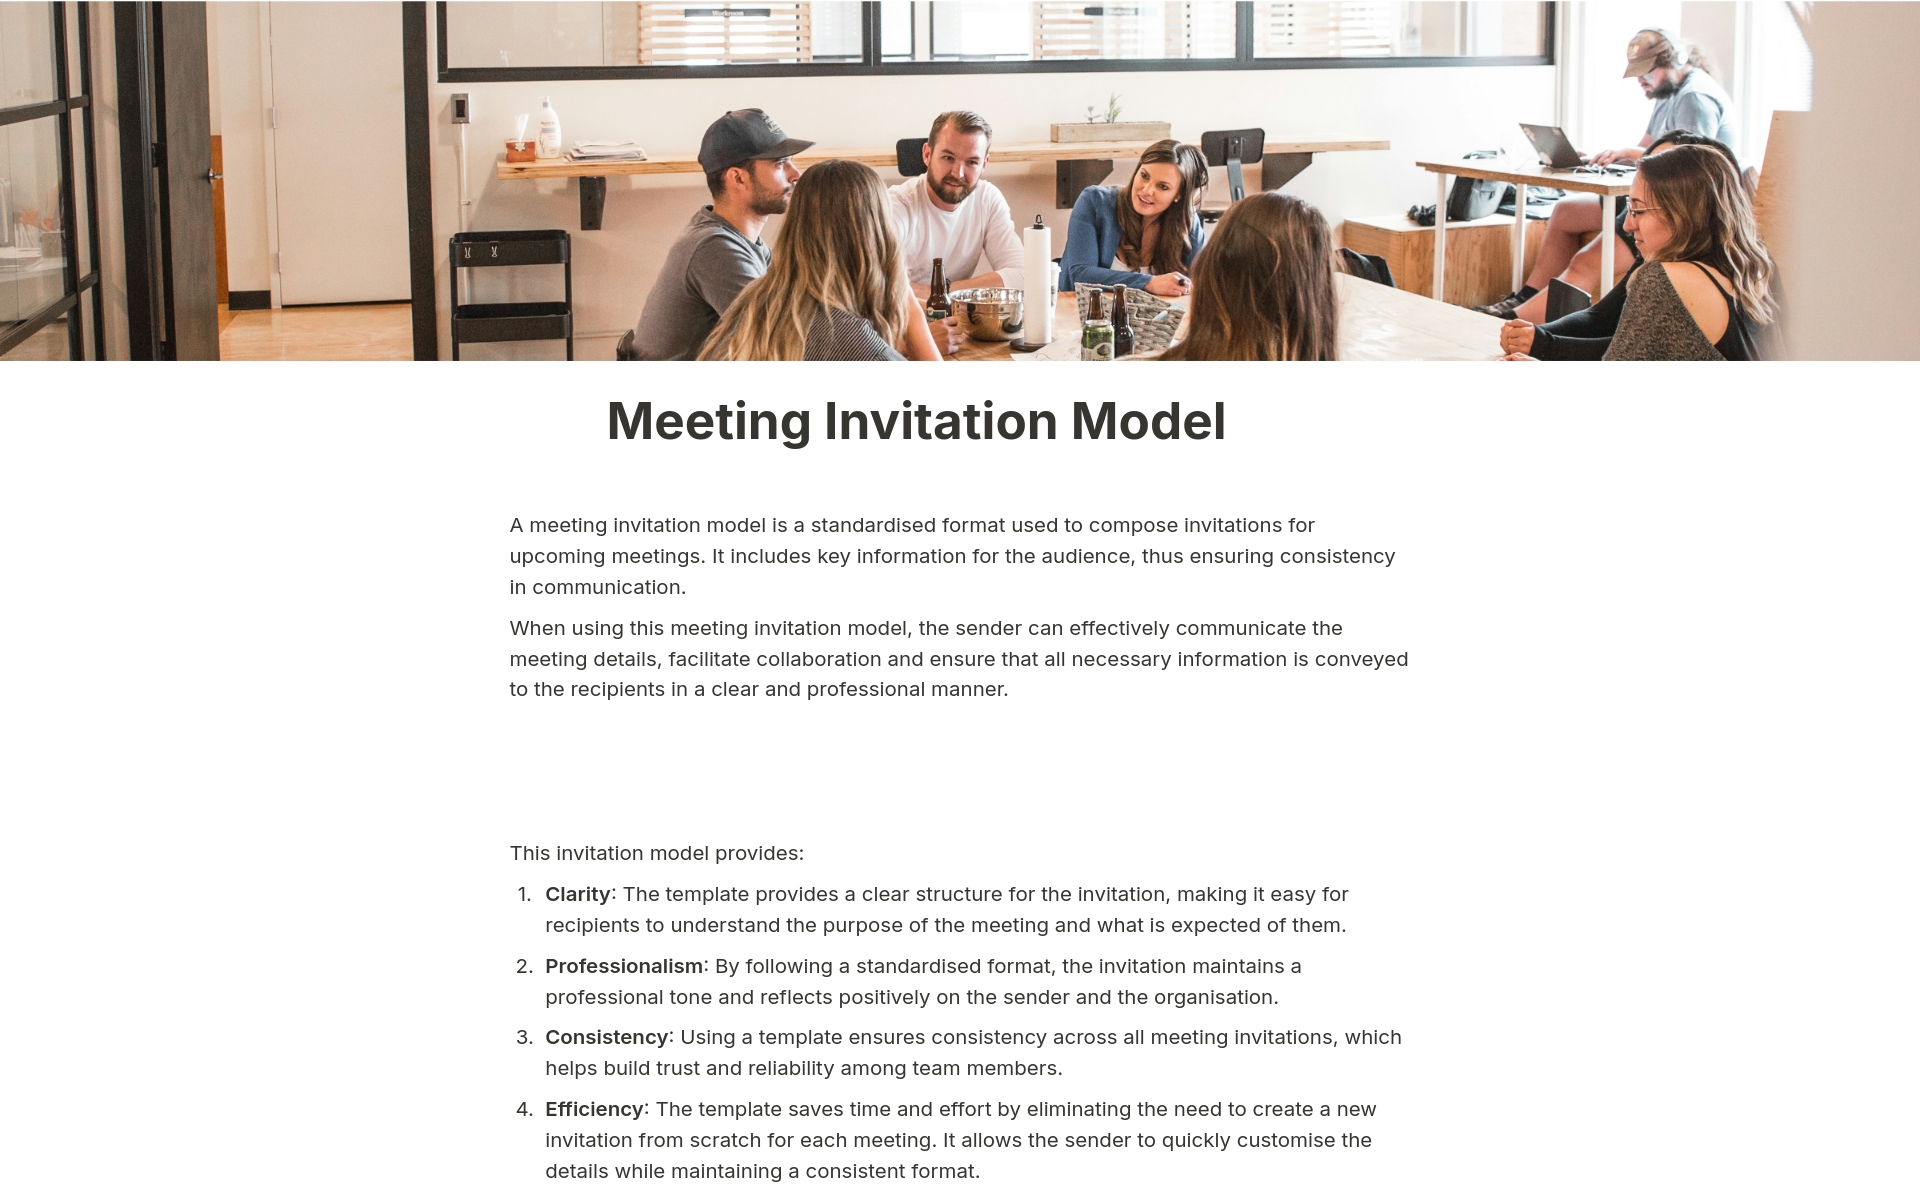 The professional meeting invitation model having the mandatory key information, in a clear and easy to understand content for all audience.